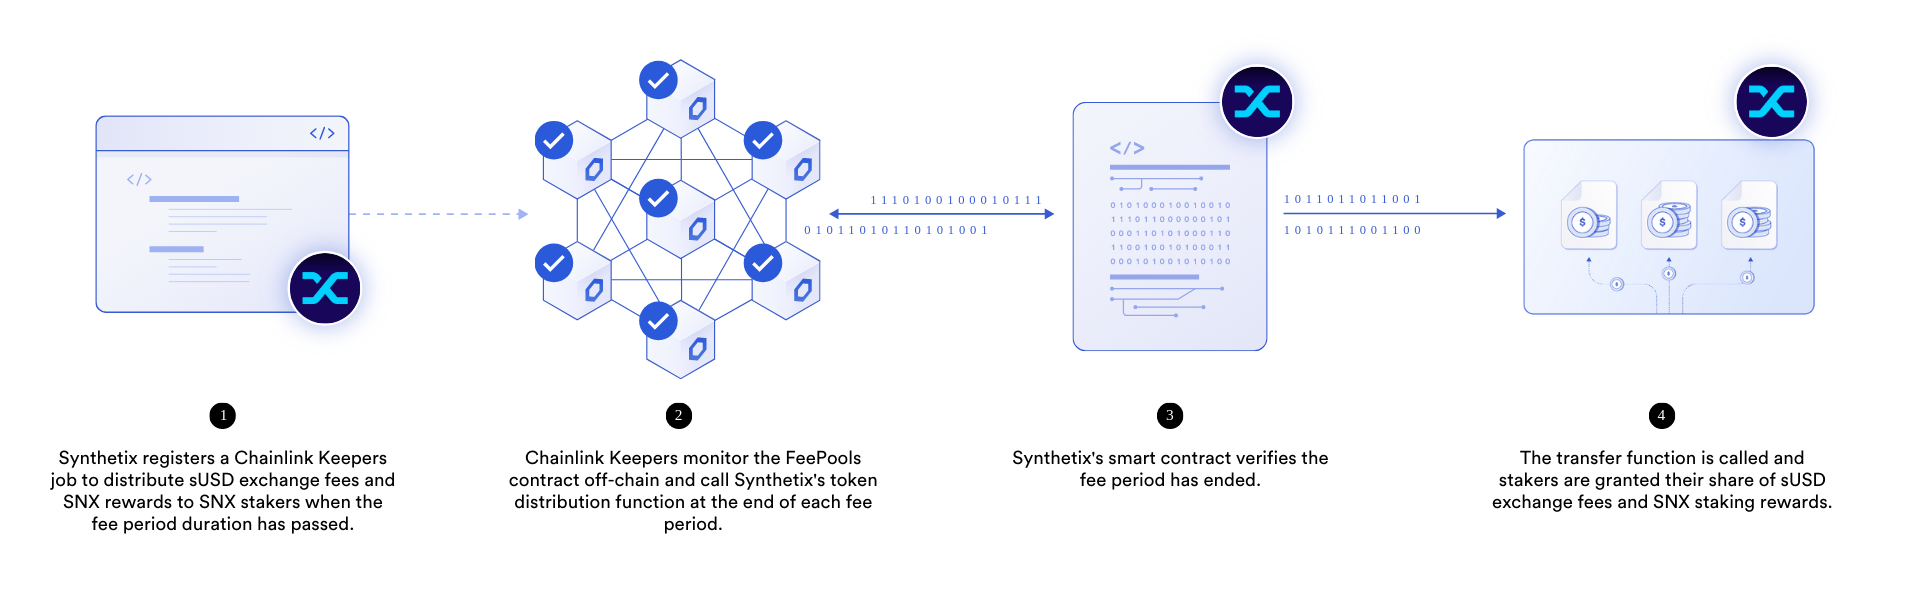 Synthetix Chainlink Keepers